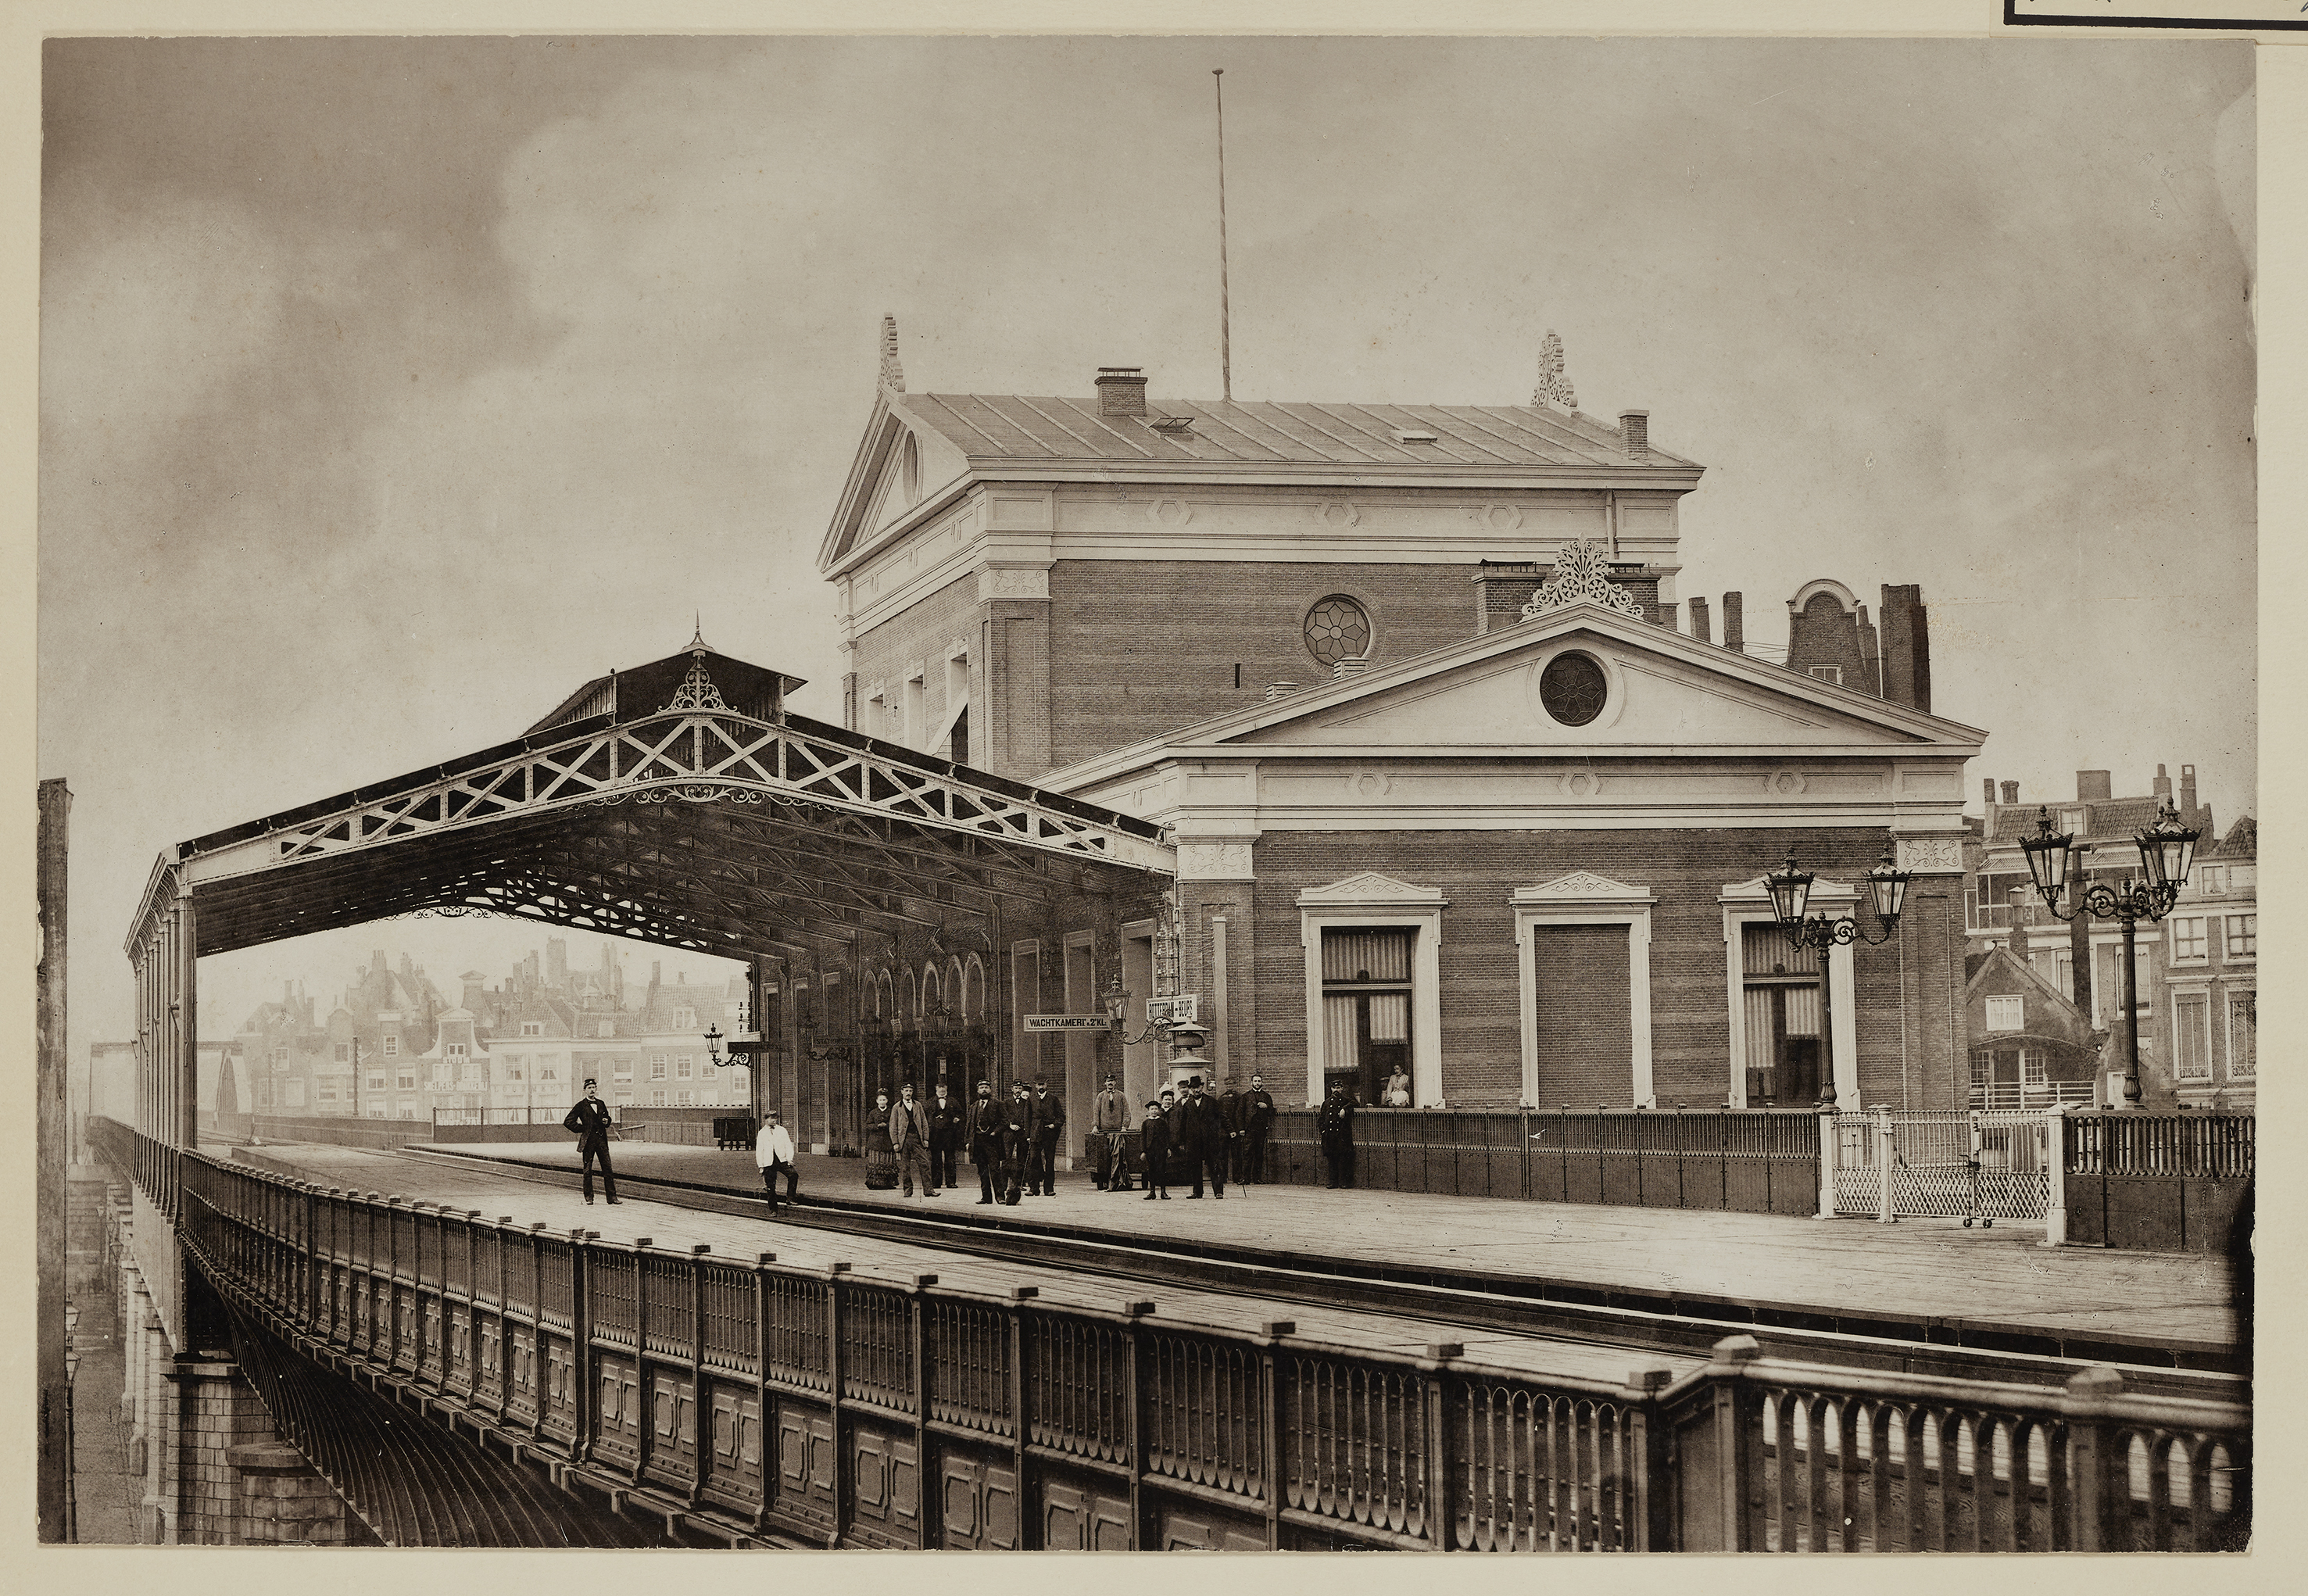 Station Rotterdam Beurs in 1877